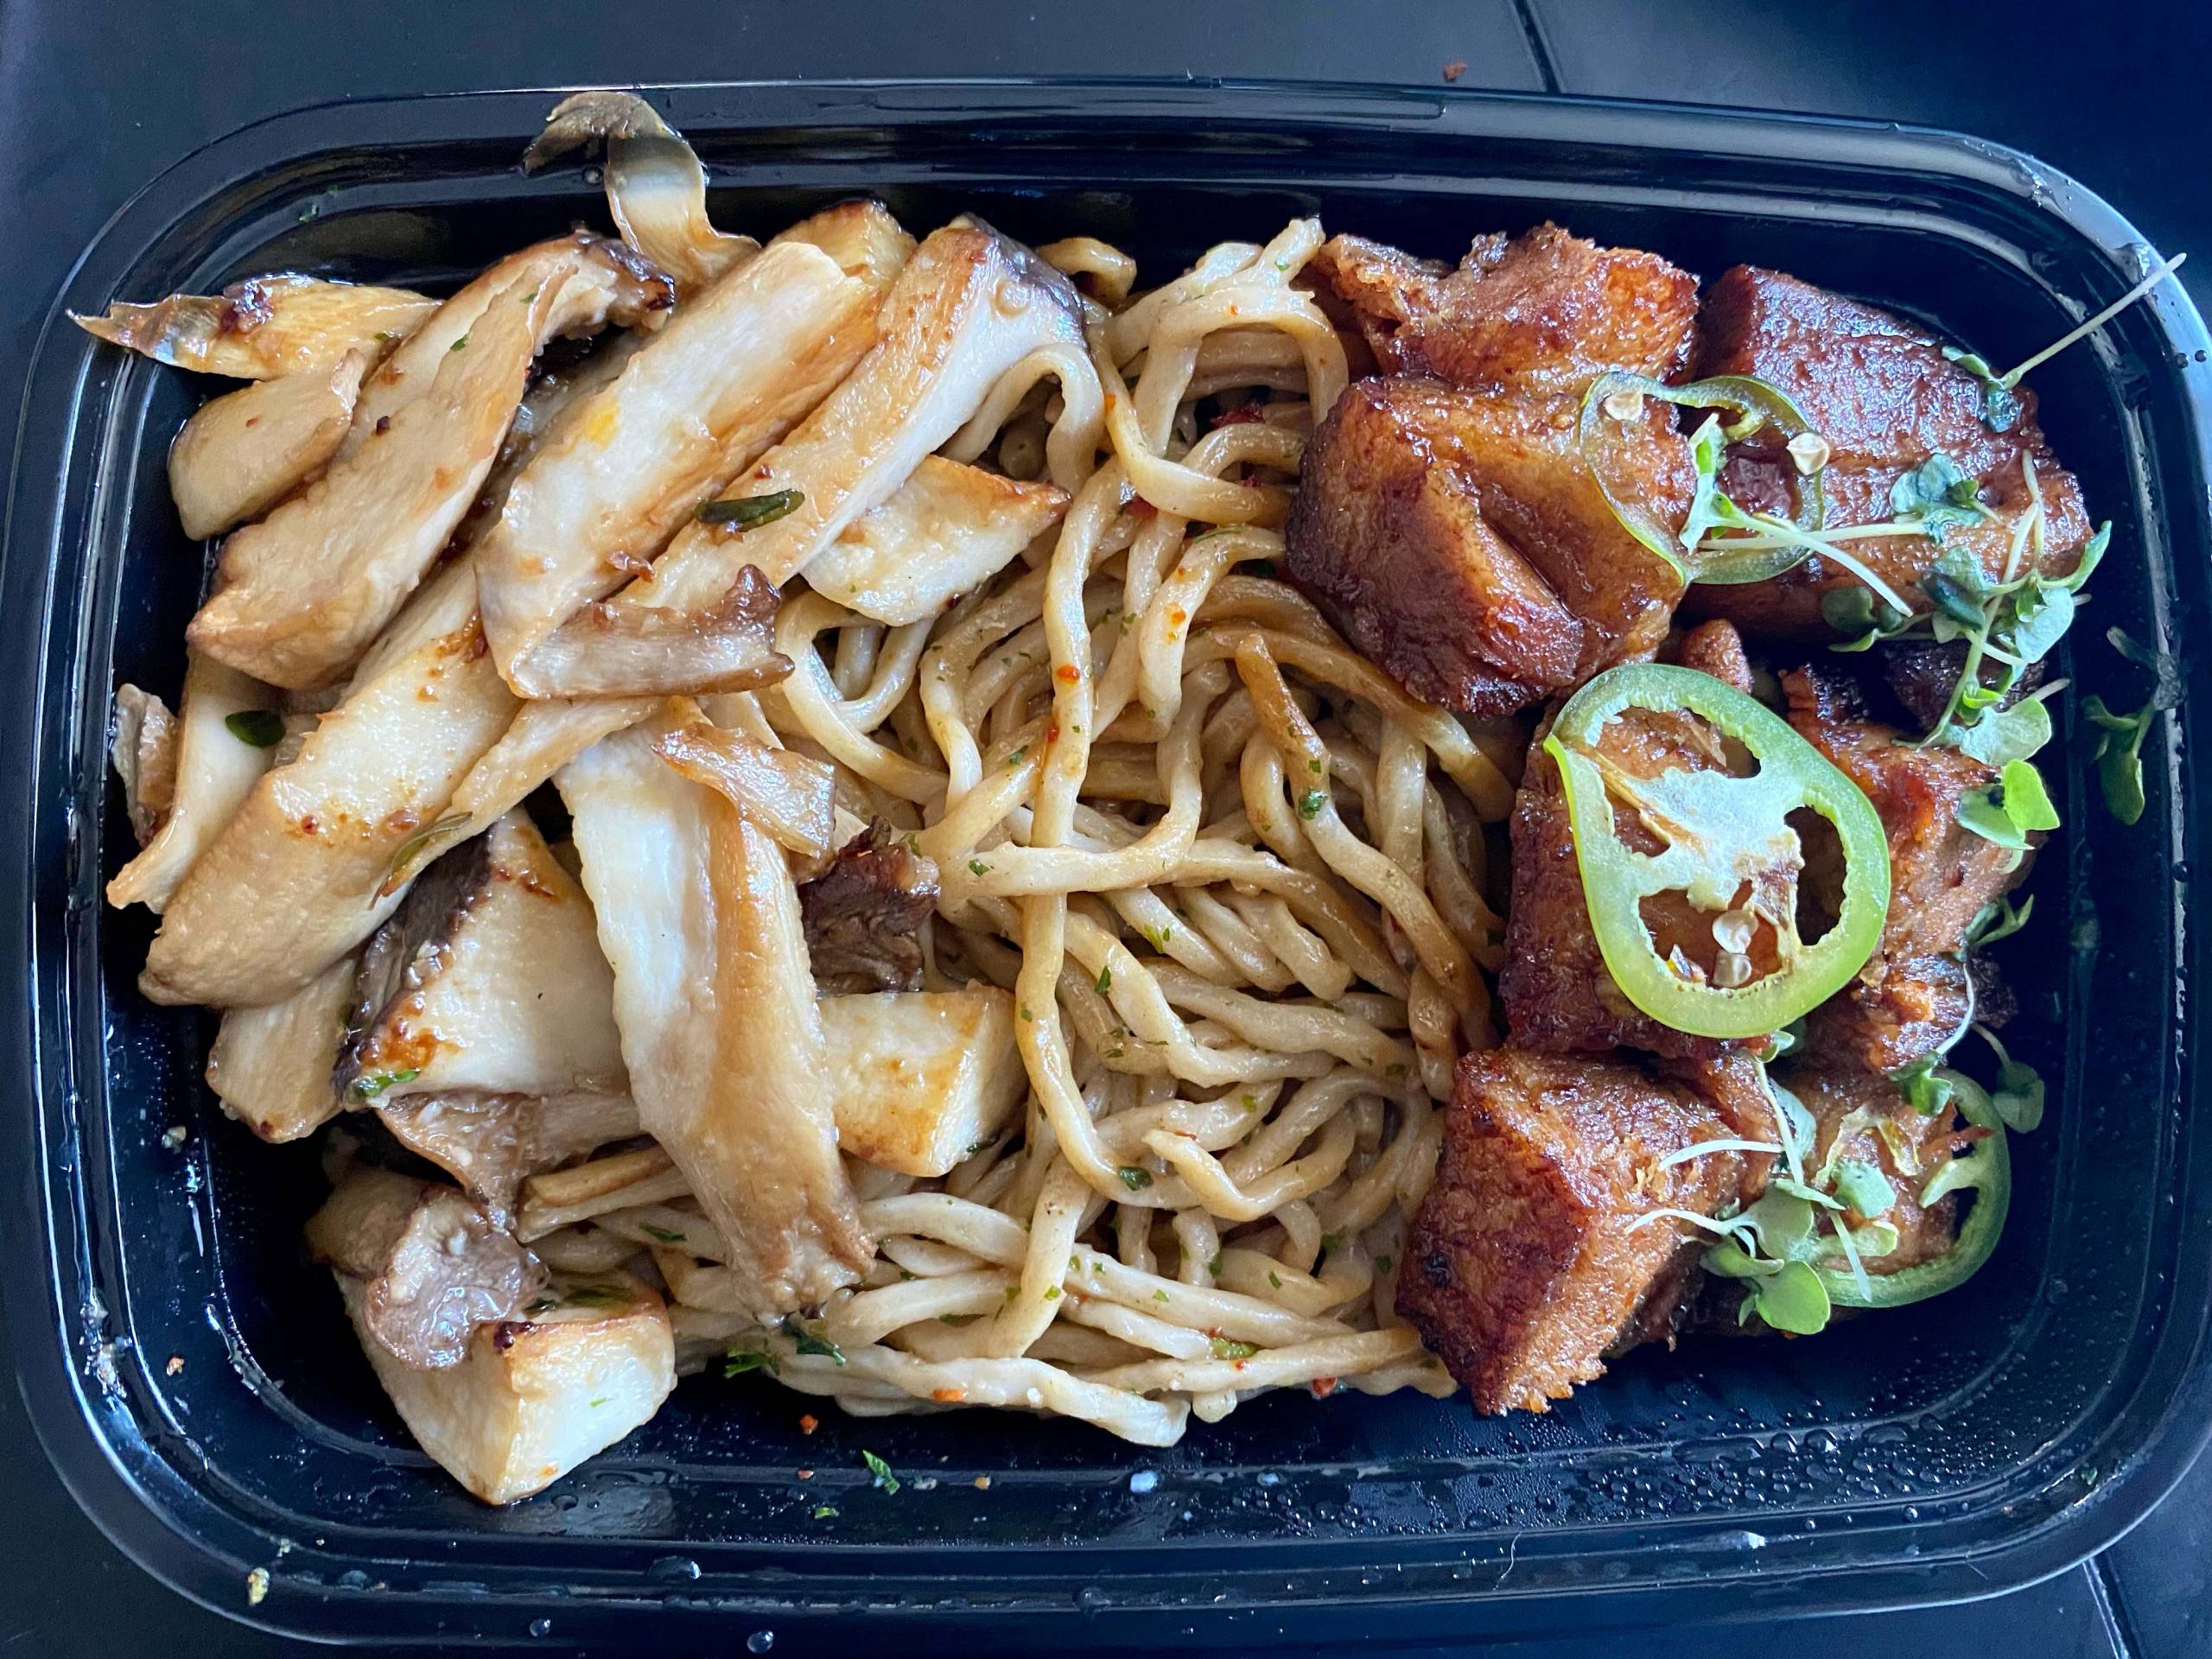 Overhead view of a takeout container of garlic noodles, roasted mushrooms and crispy pork belly.